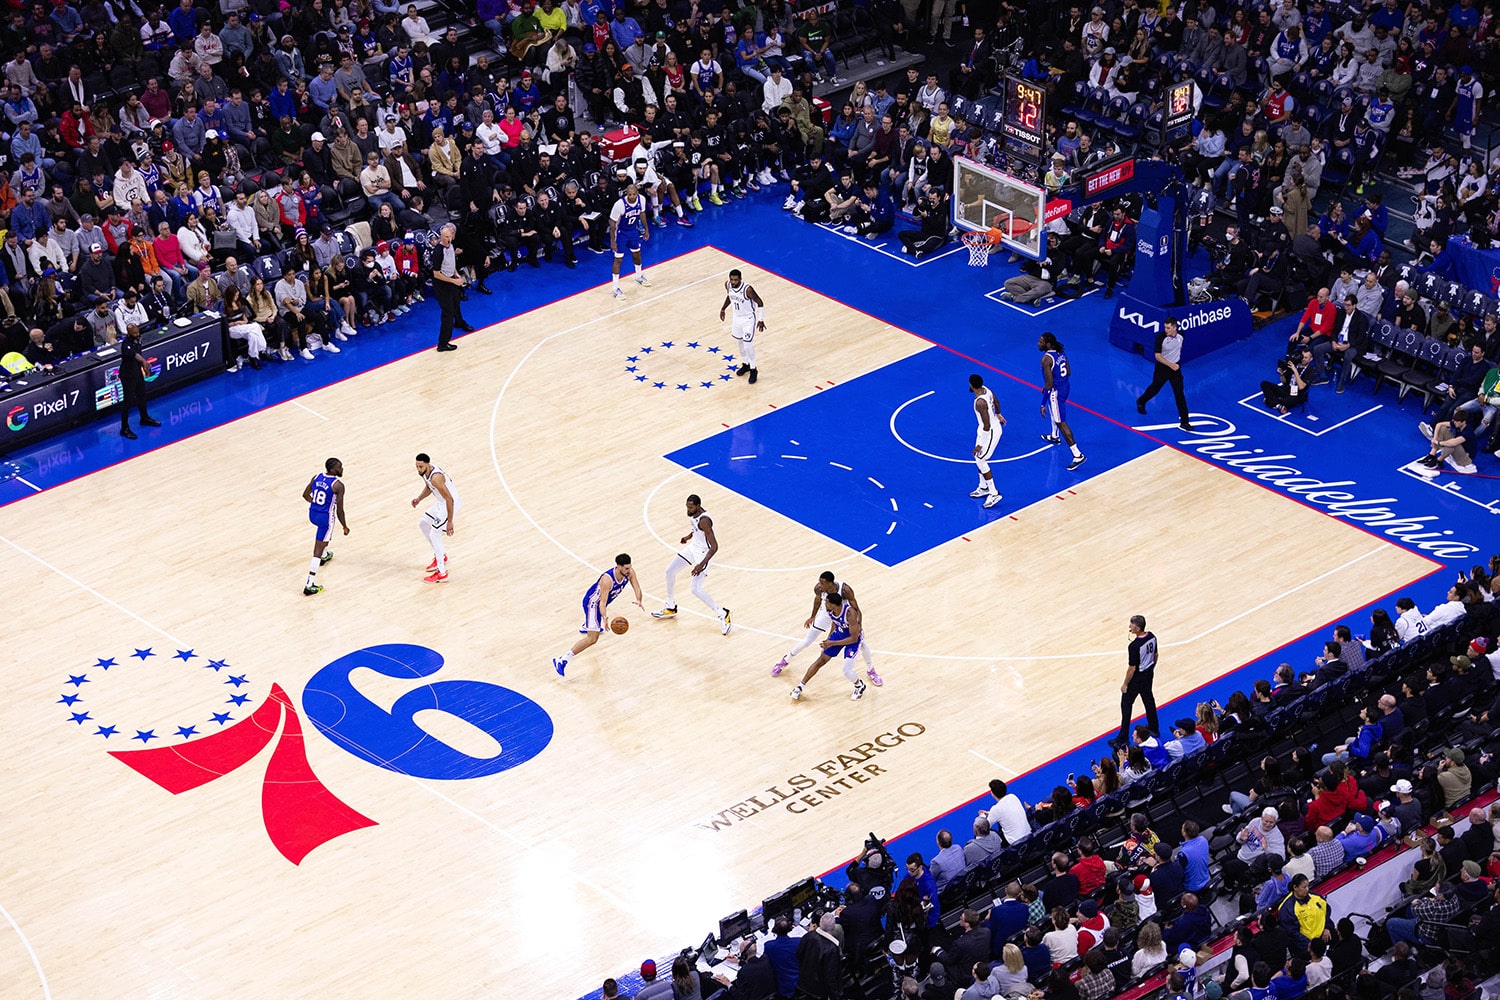 A general view of the Philadelphia 76ers playing at their current home arena, the Wells Fargo Center.